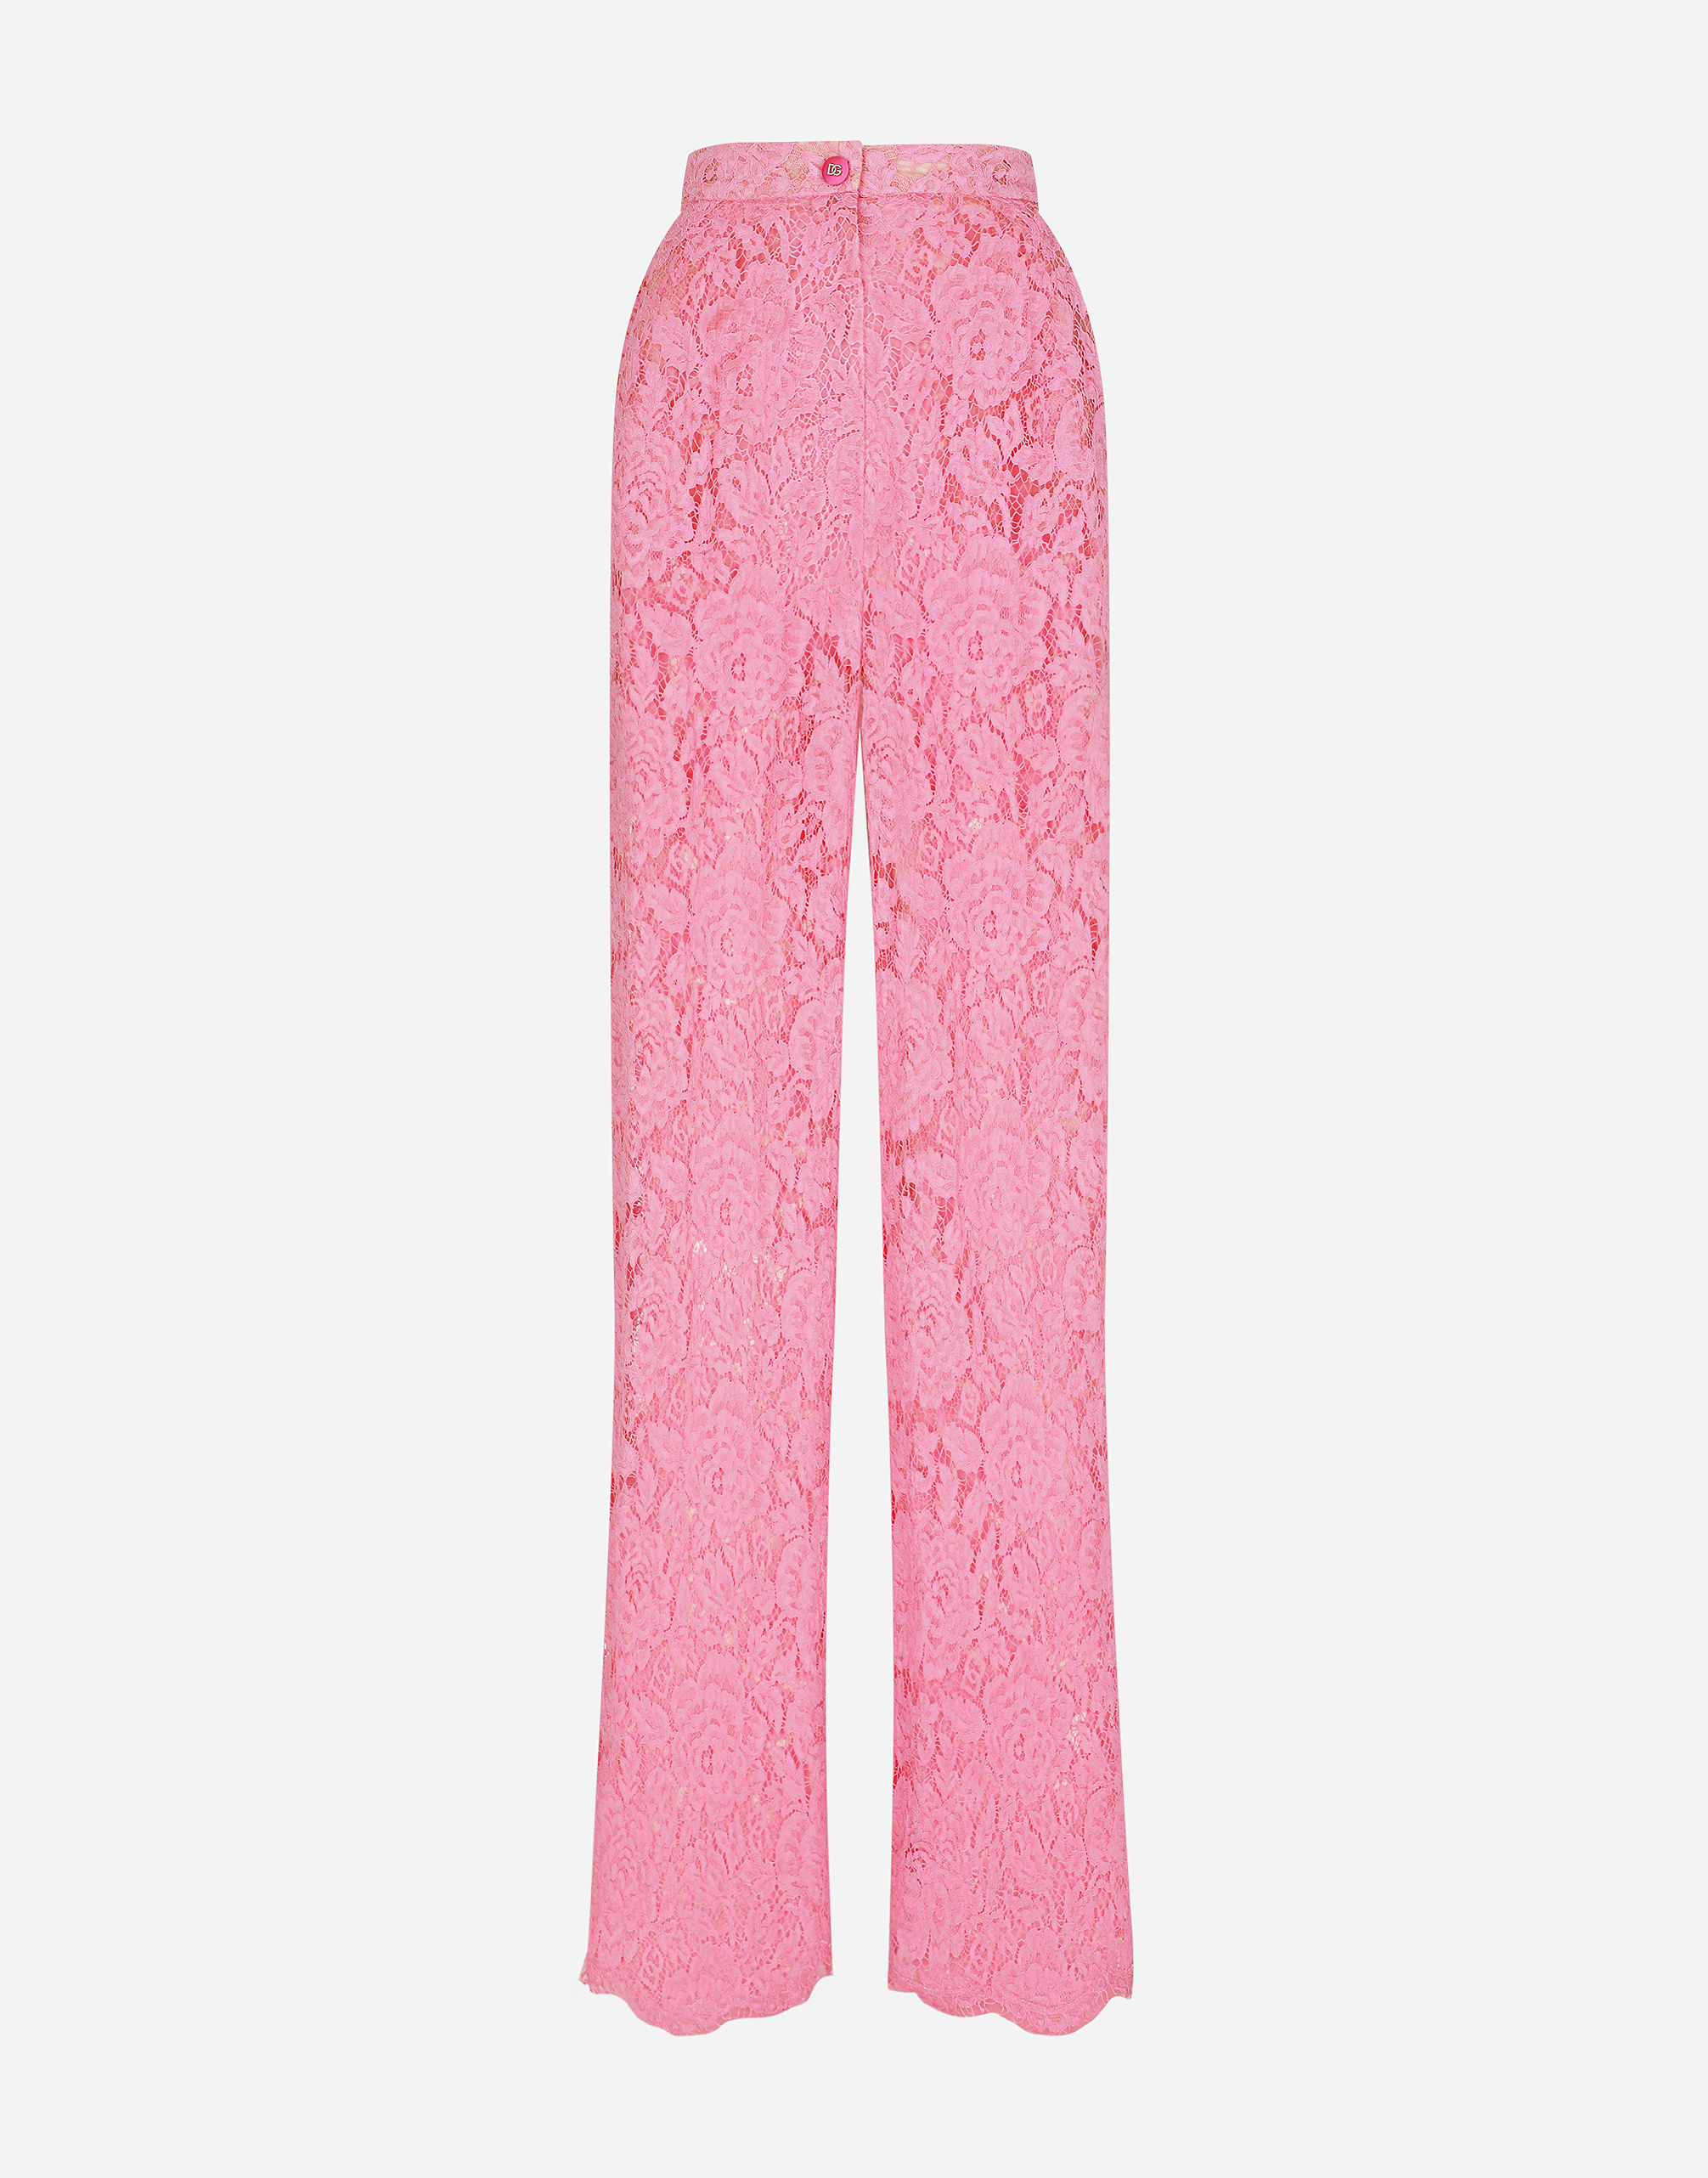 Flared branded stretch lace pants in Pink for Women